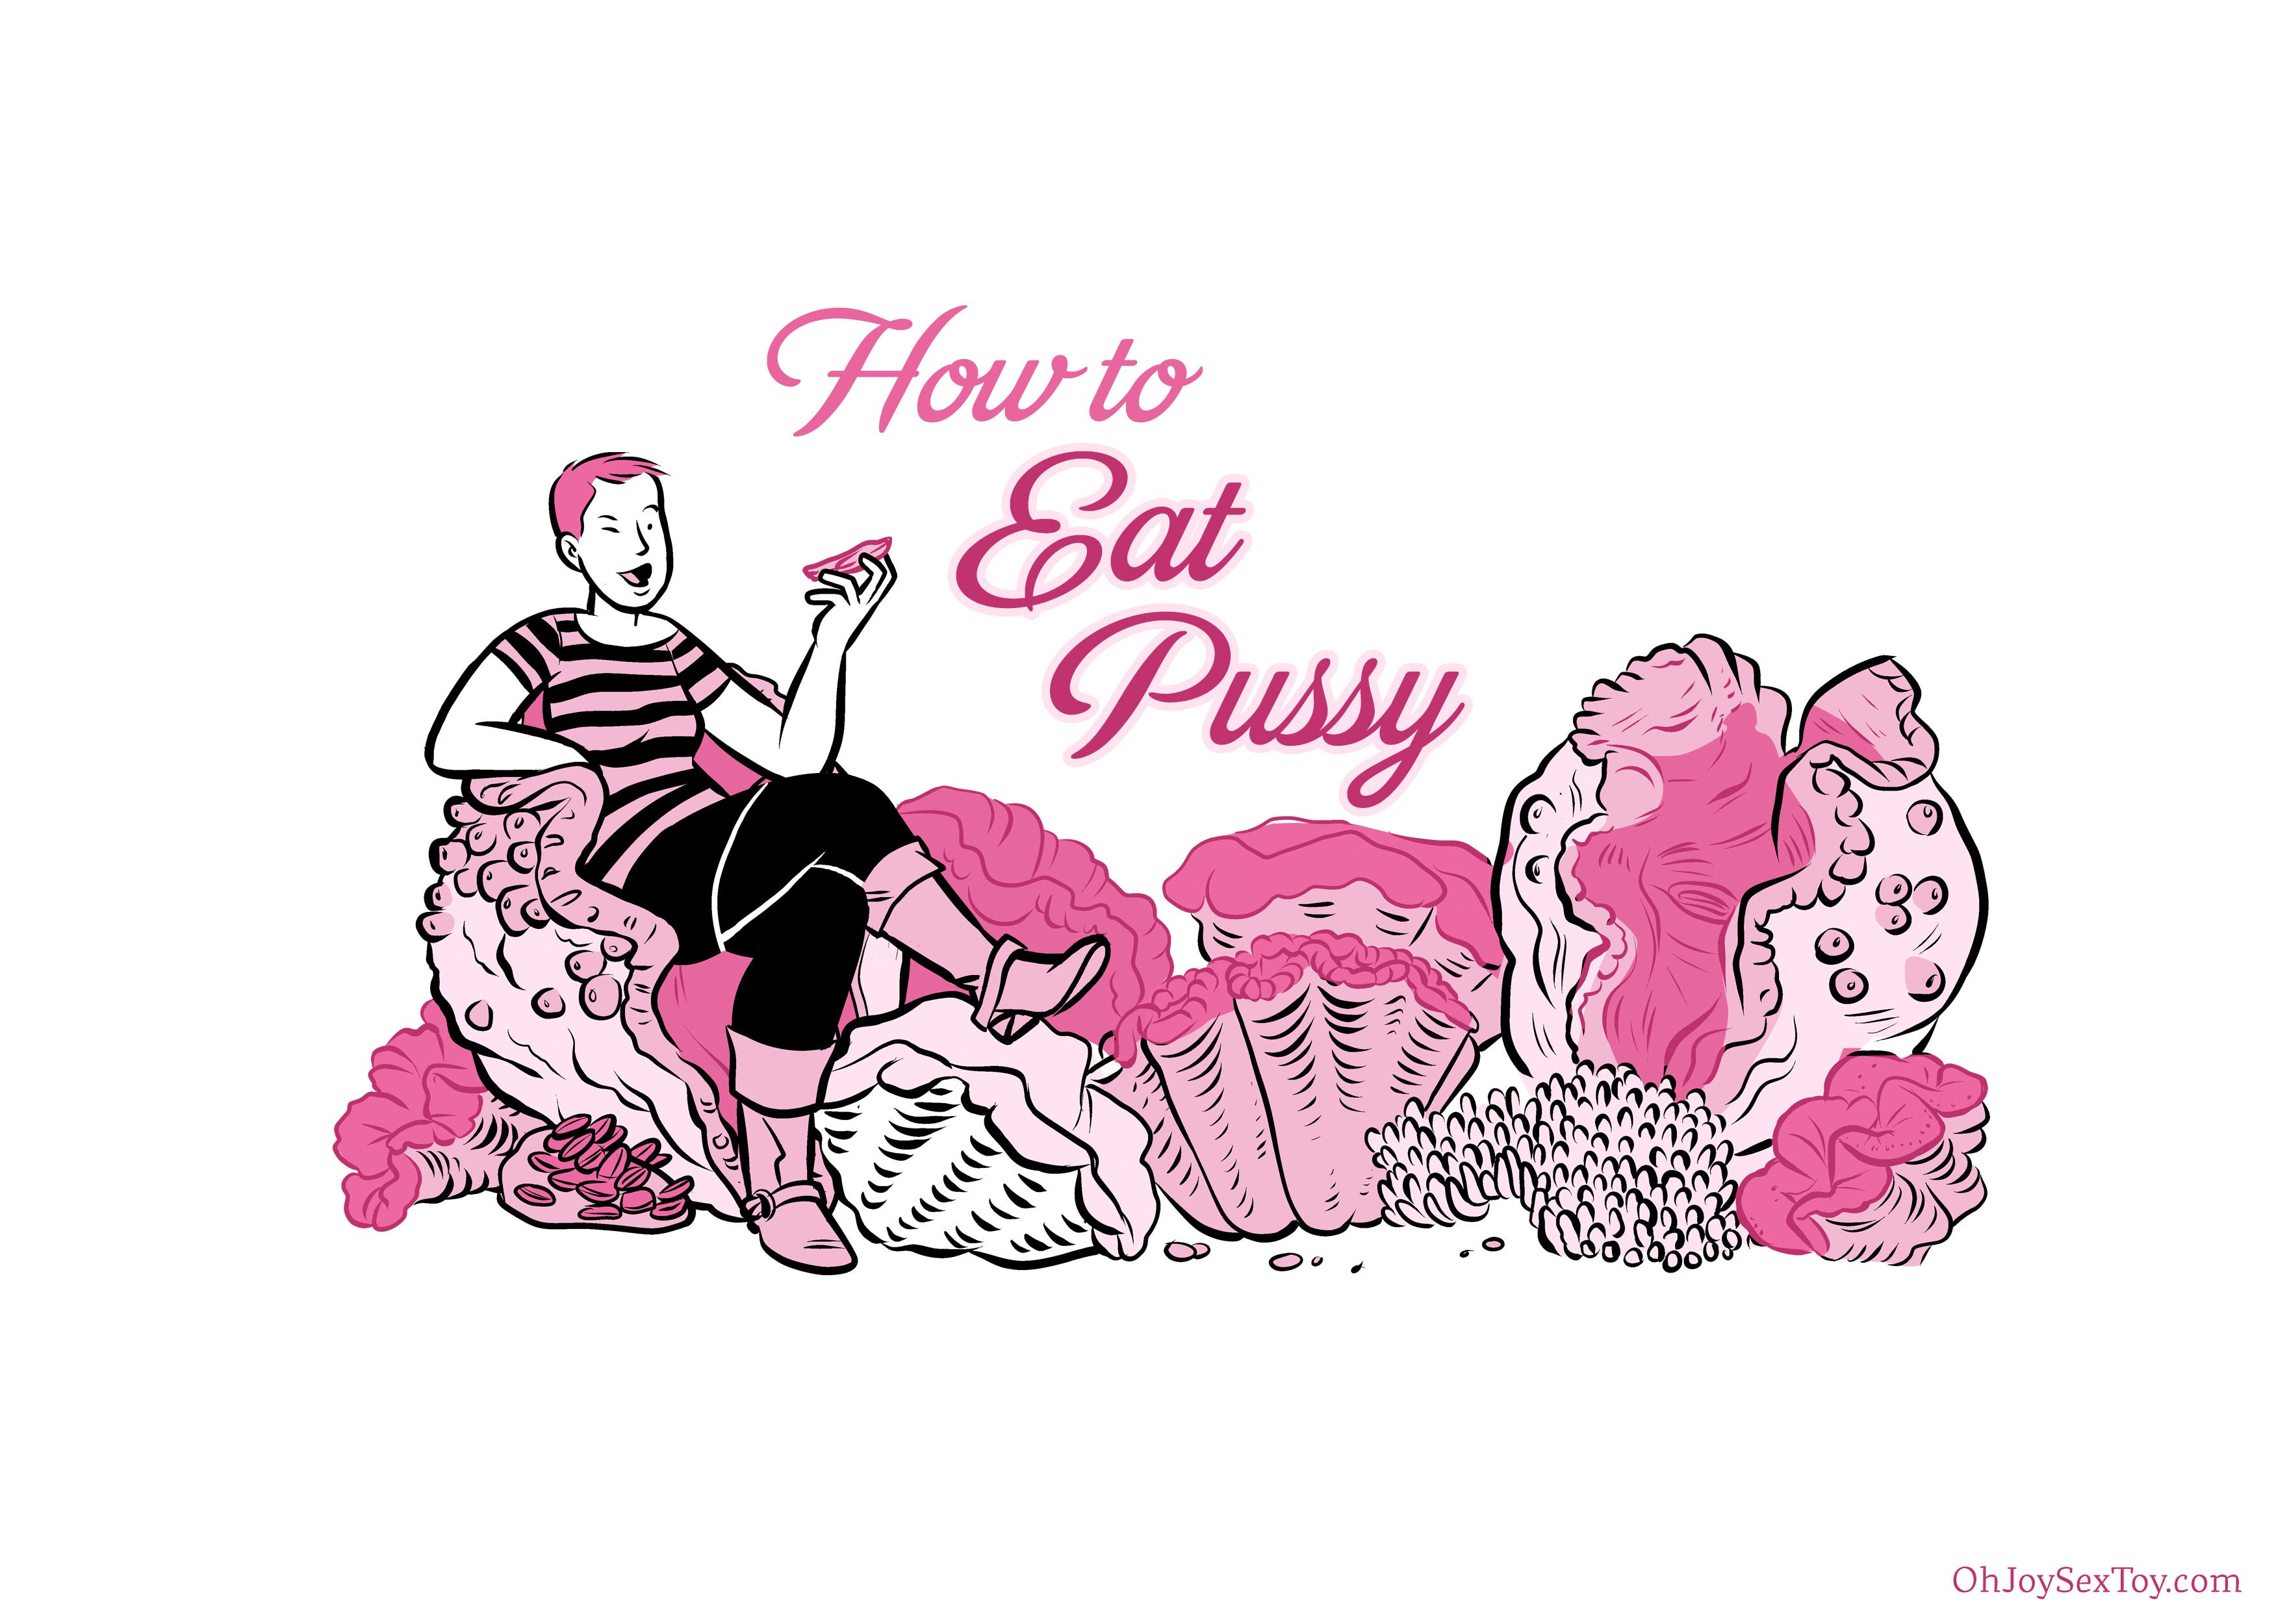 How To Eat Pussy. An introduction to cunnilingus | by Erika Moen | The Nib  | Medium